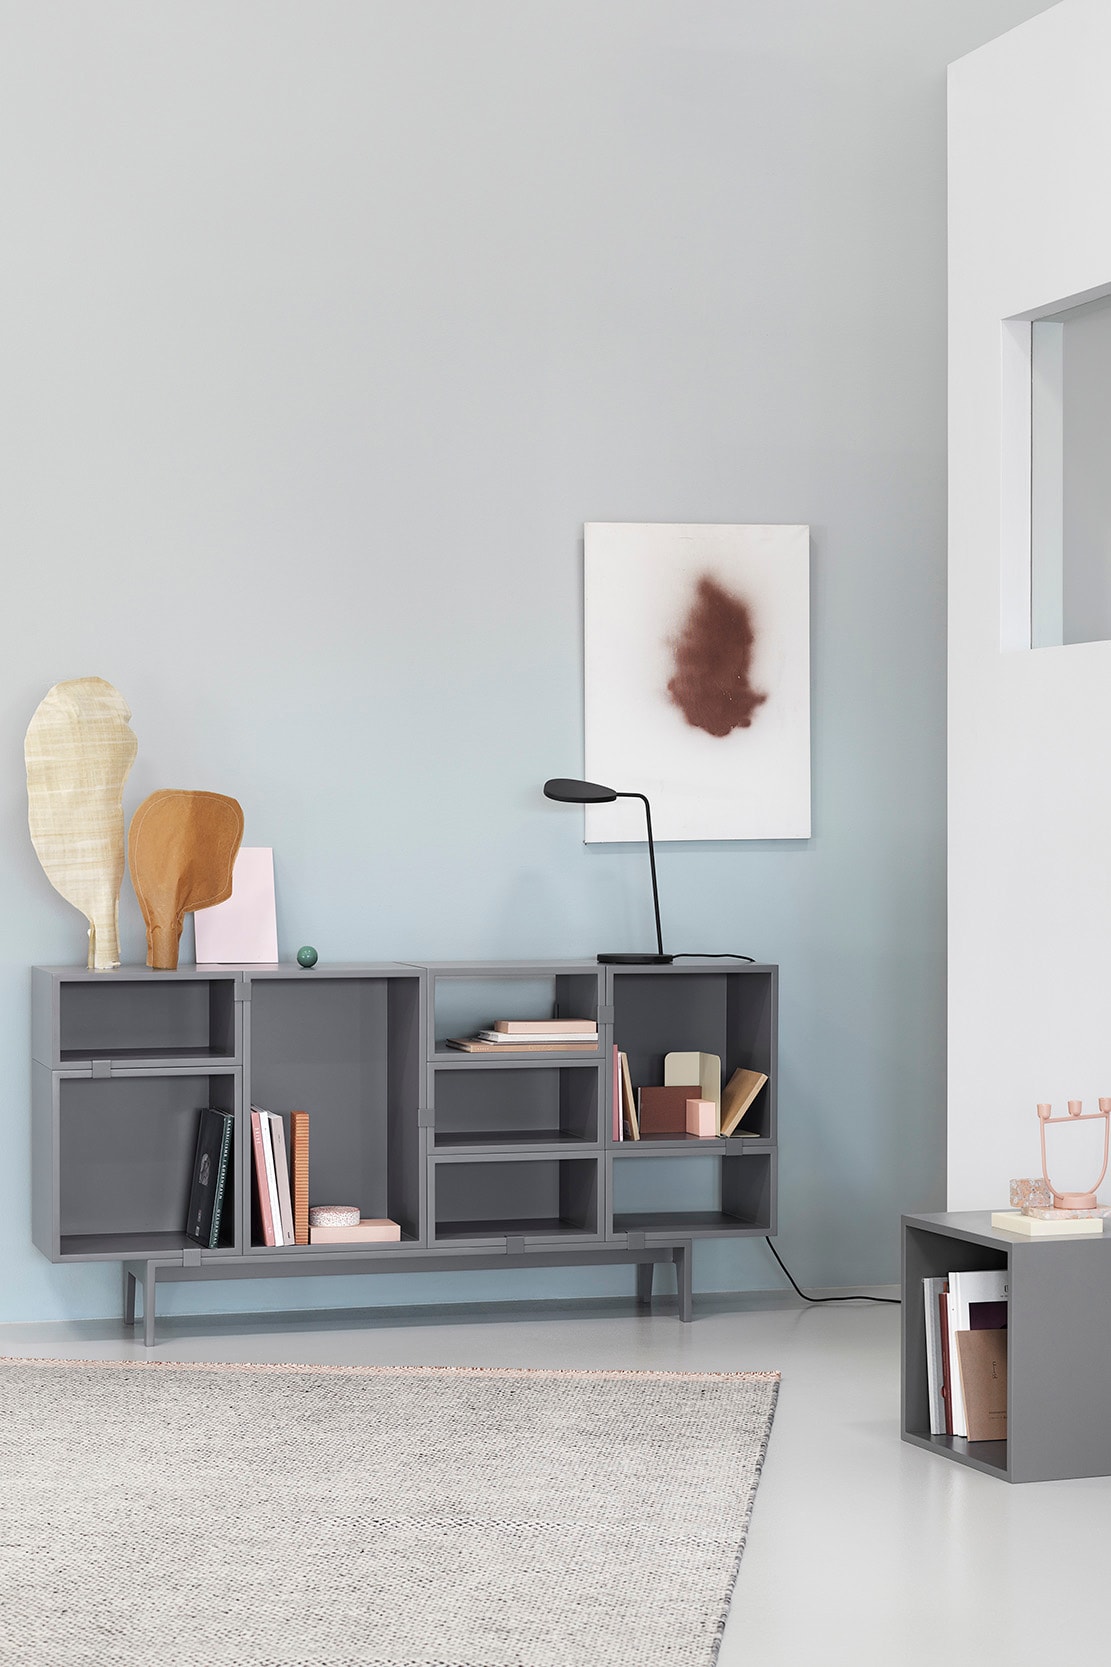 Muuto "New Perspectives" Collection Furniture Base Table High Pendant Lamp Enfold Sideboard Oslo 3-Seater Corner Sofa Pouf The Dots Metal Workshop Coffee Table